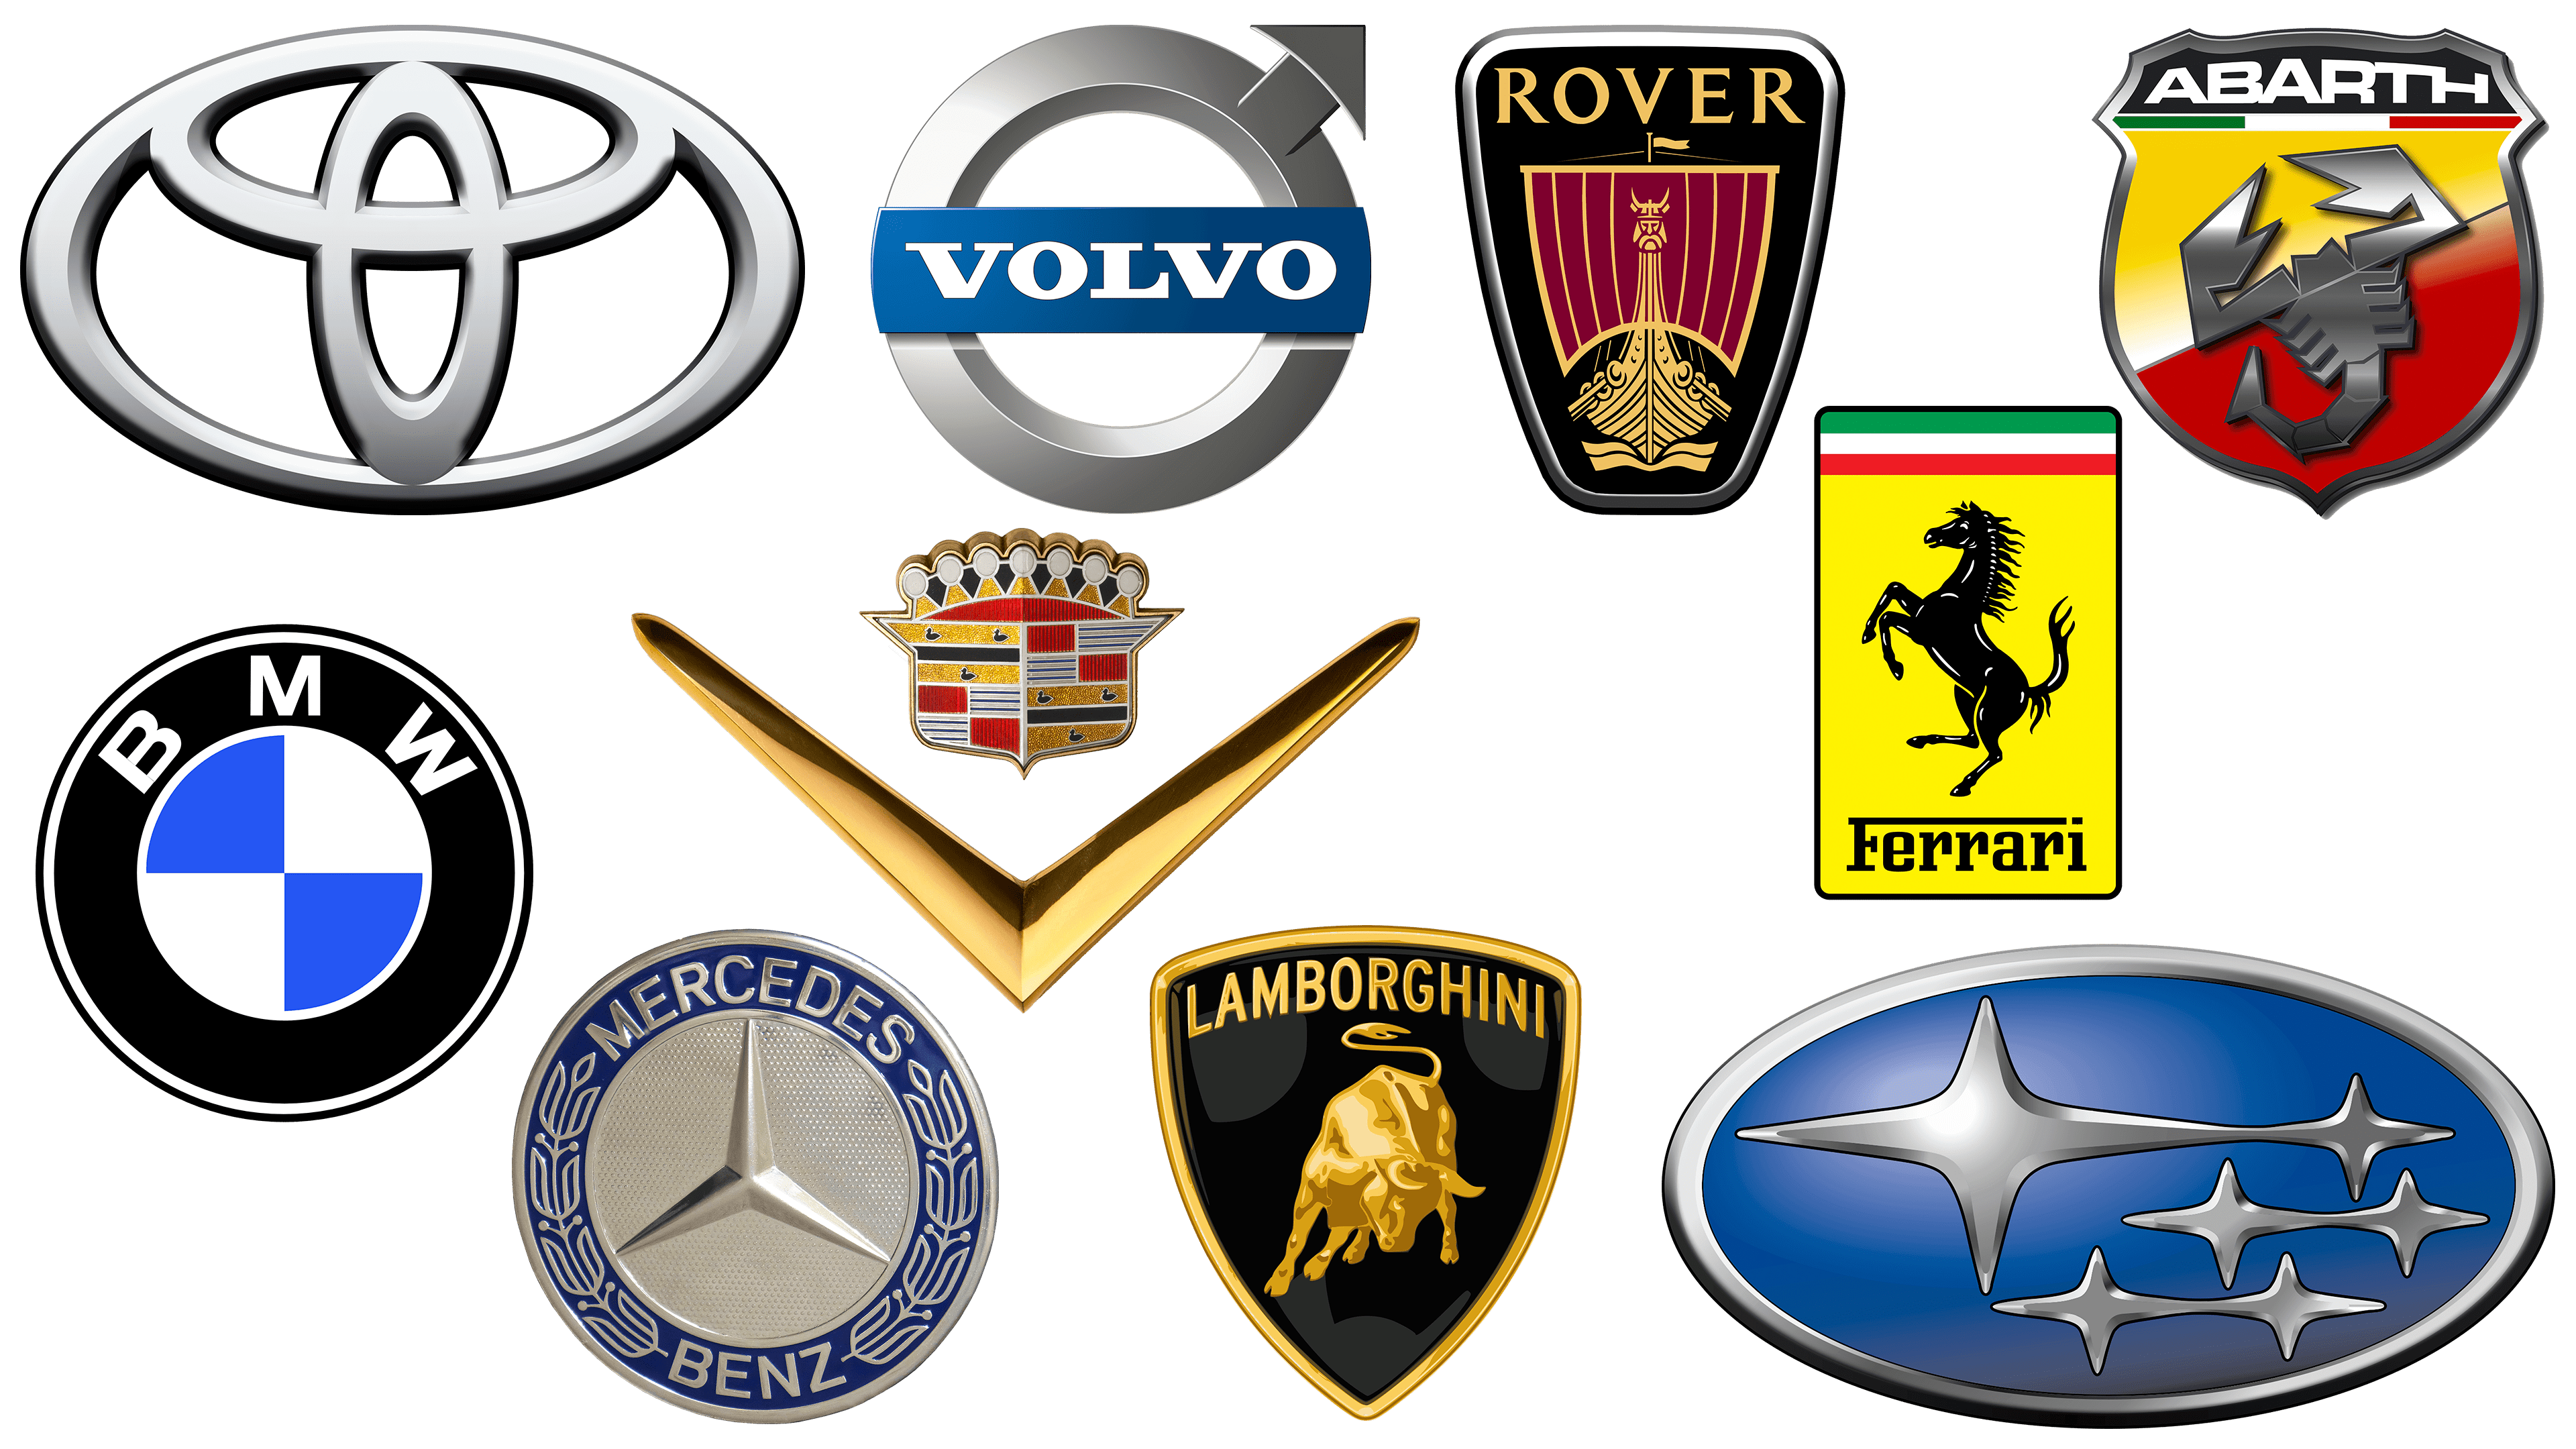 Car Logos History: 10 Iconic Car Emblems With Great Tales To Tell